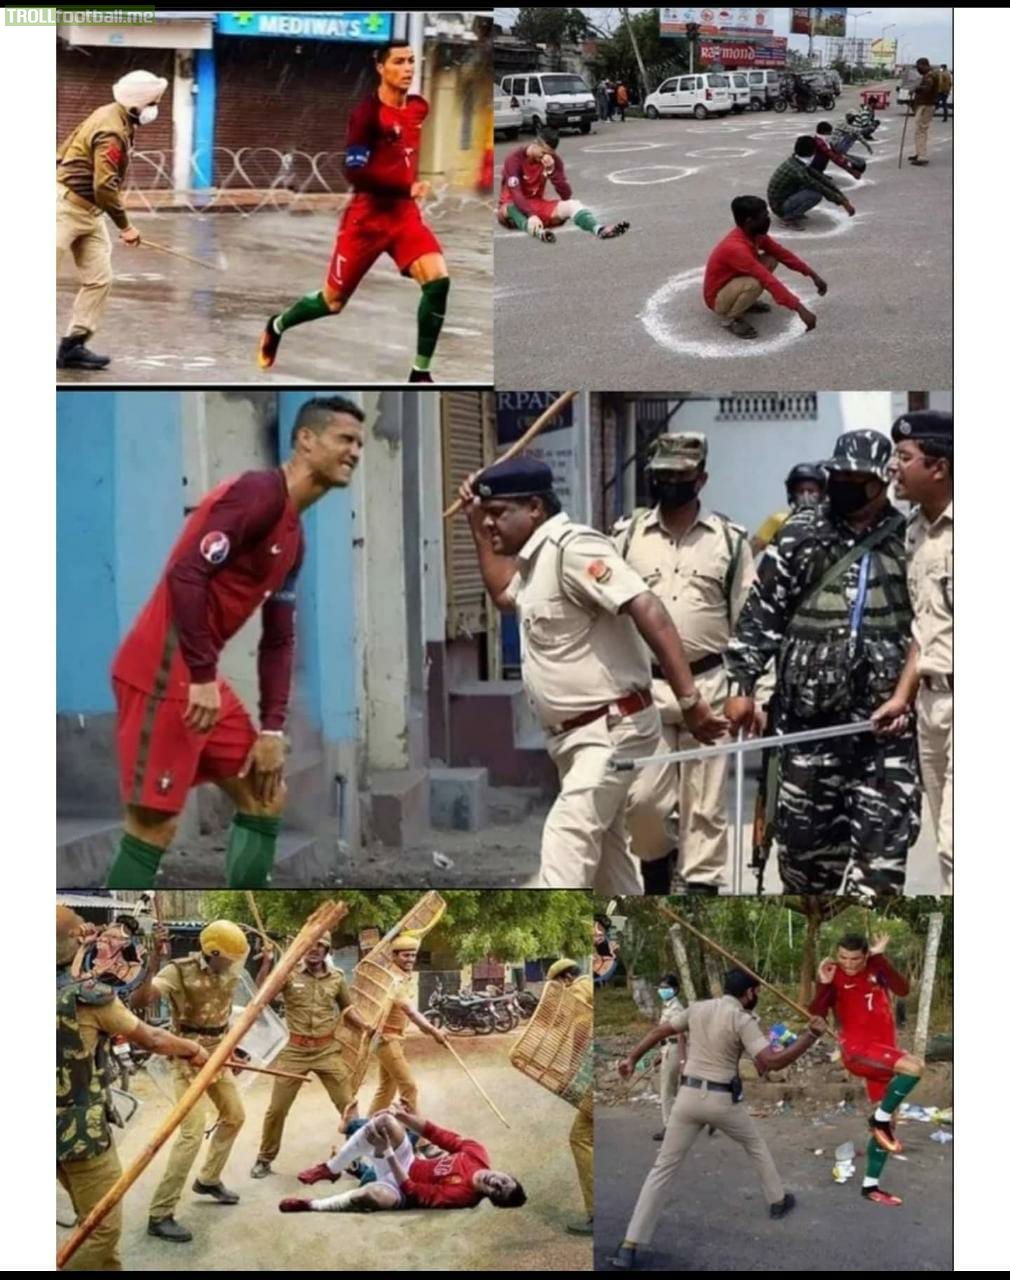 CR7 - Ronaldo in India getting tackled by "defenders"